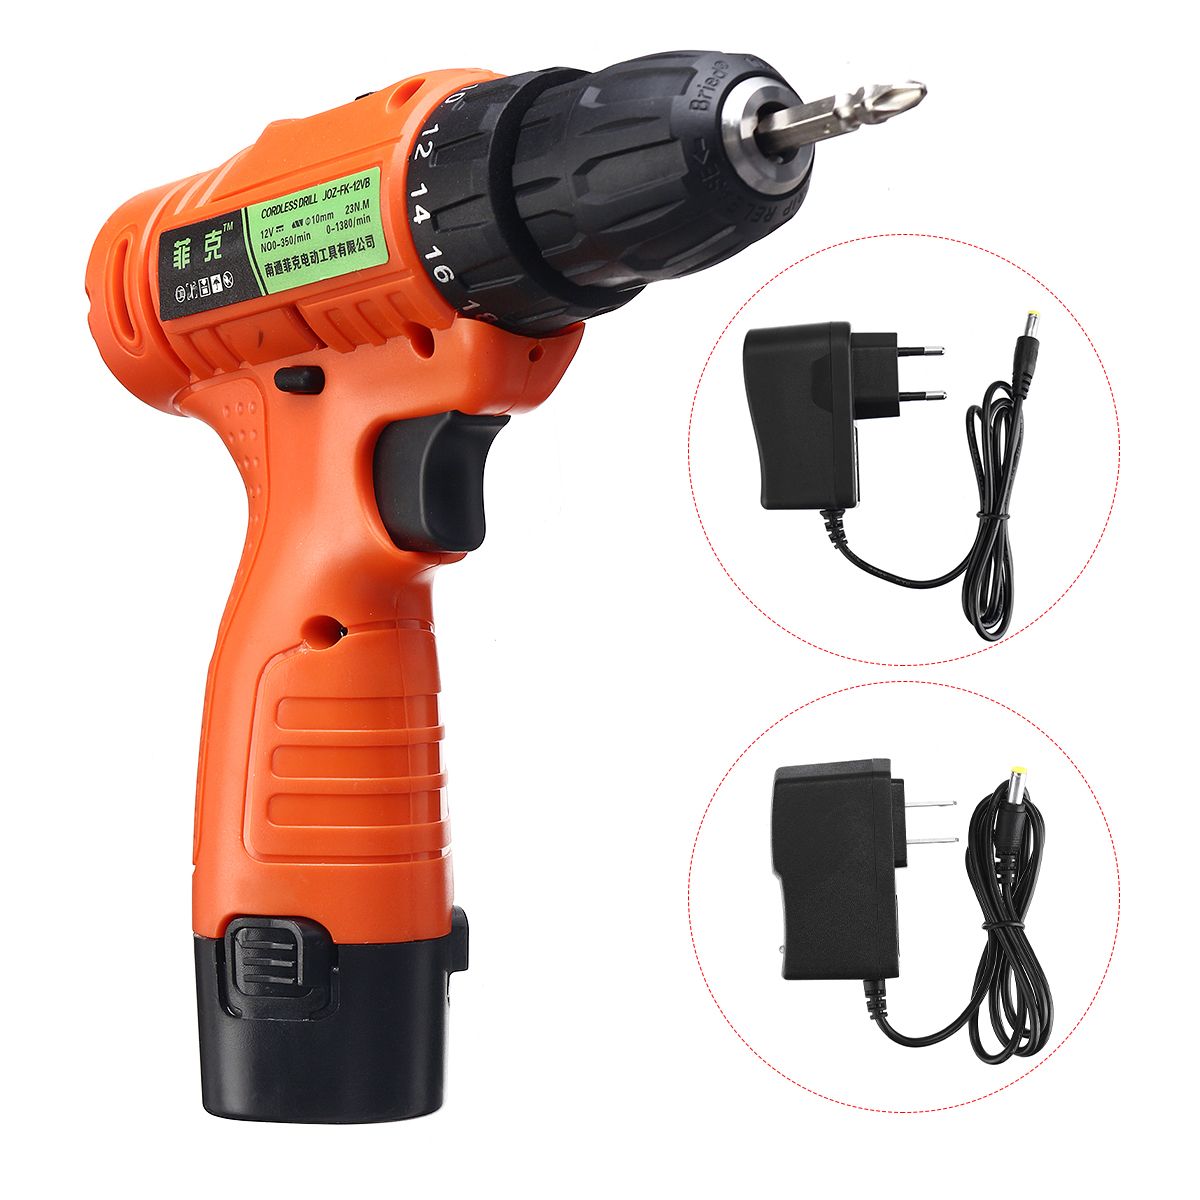 12V-Dual-Speed-Rechargable-Electric-Drill-Driver-Mini-Multifunction-Household-Li-ion-Battery-Power-S-1659811